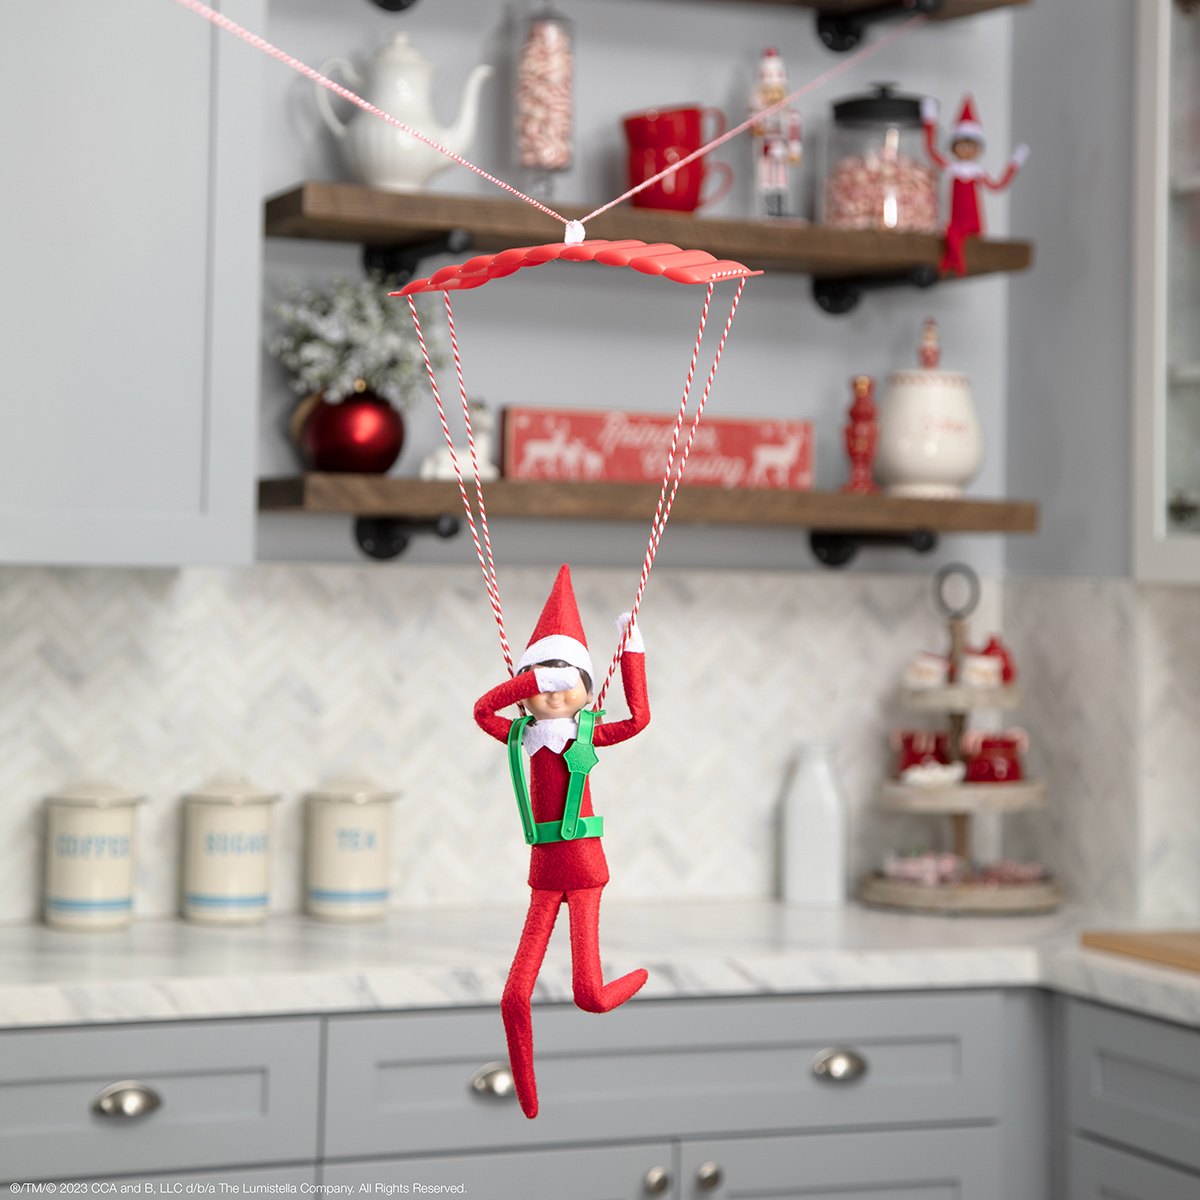 Alt text: The Elf on the Shelf ziplining through the kitchen while covering their eyes.